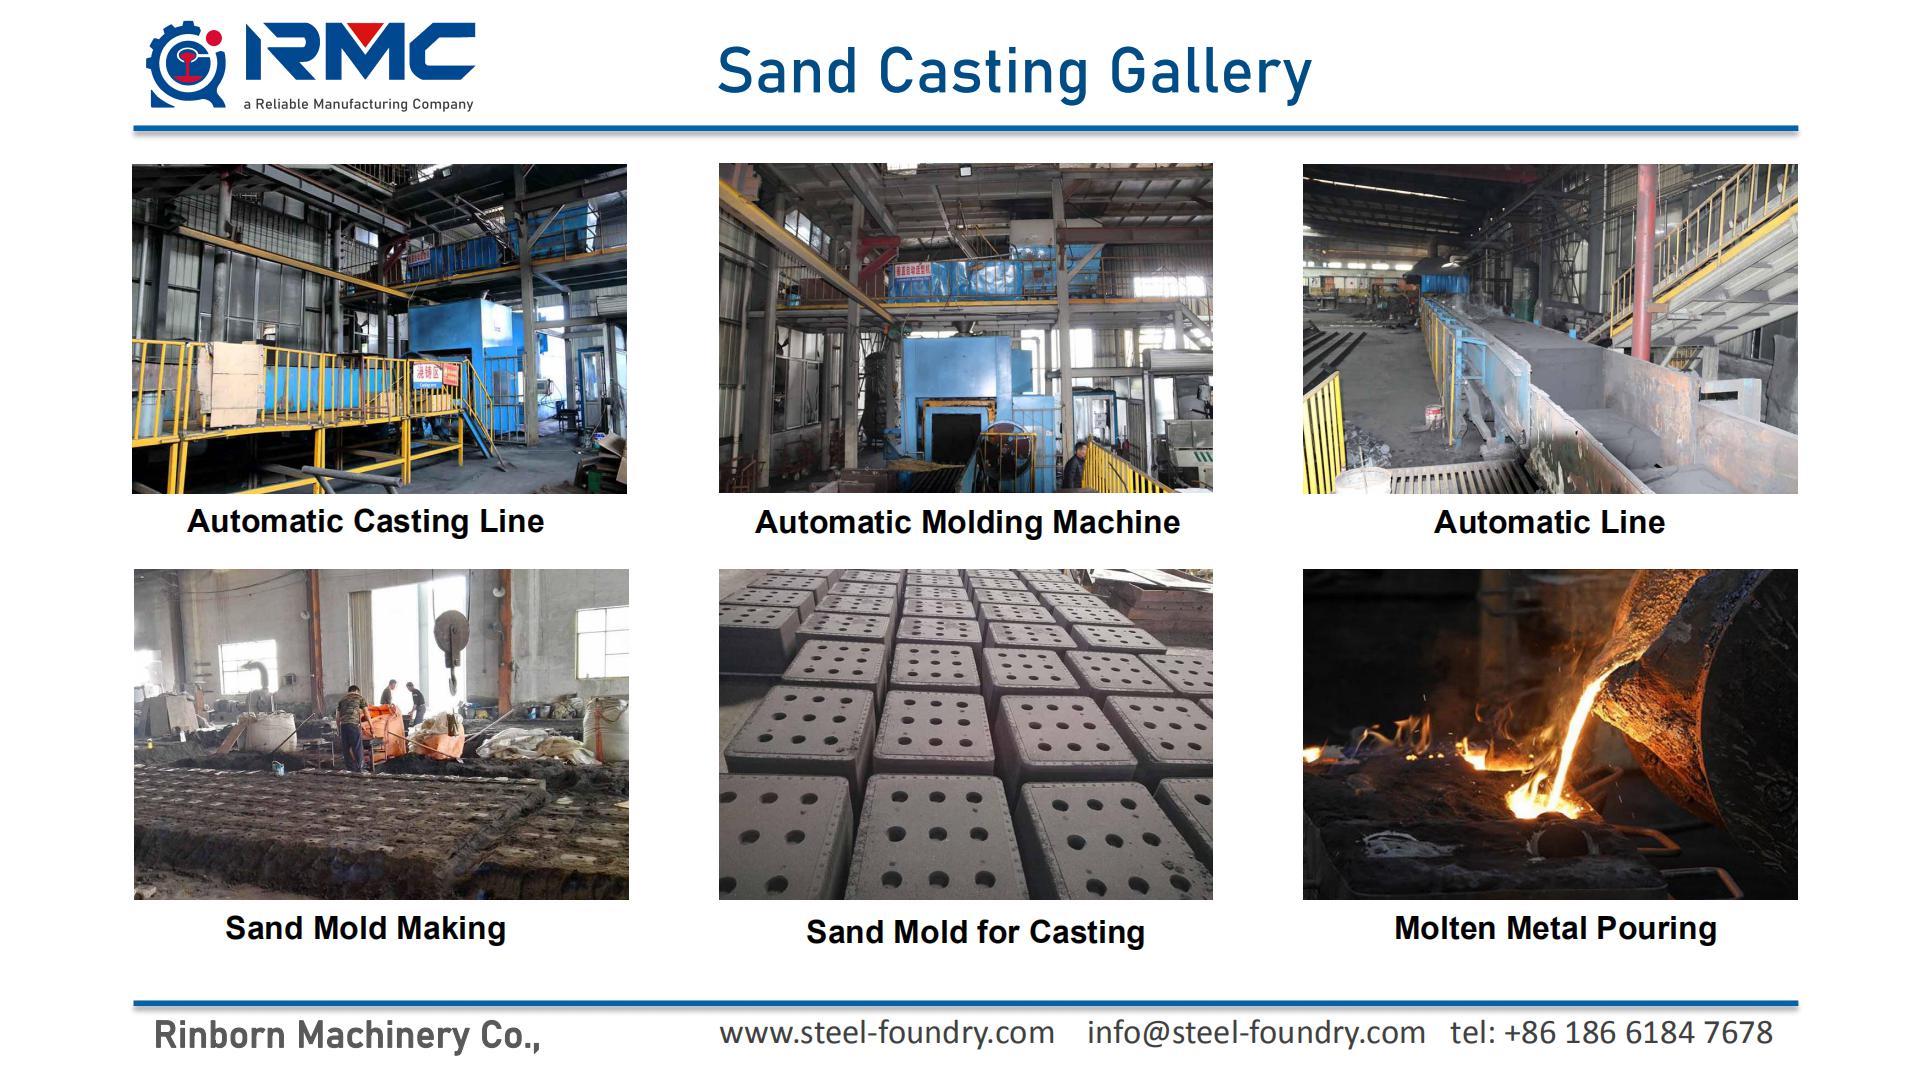 Aluminium Casting Product by Sand Casting, Steel Casting Factory